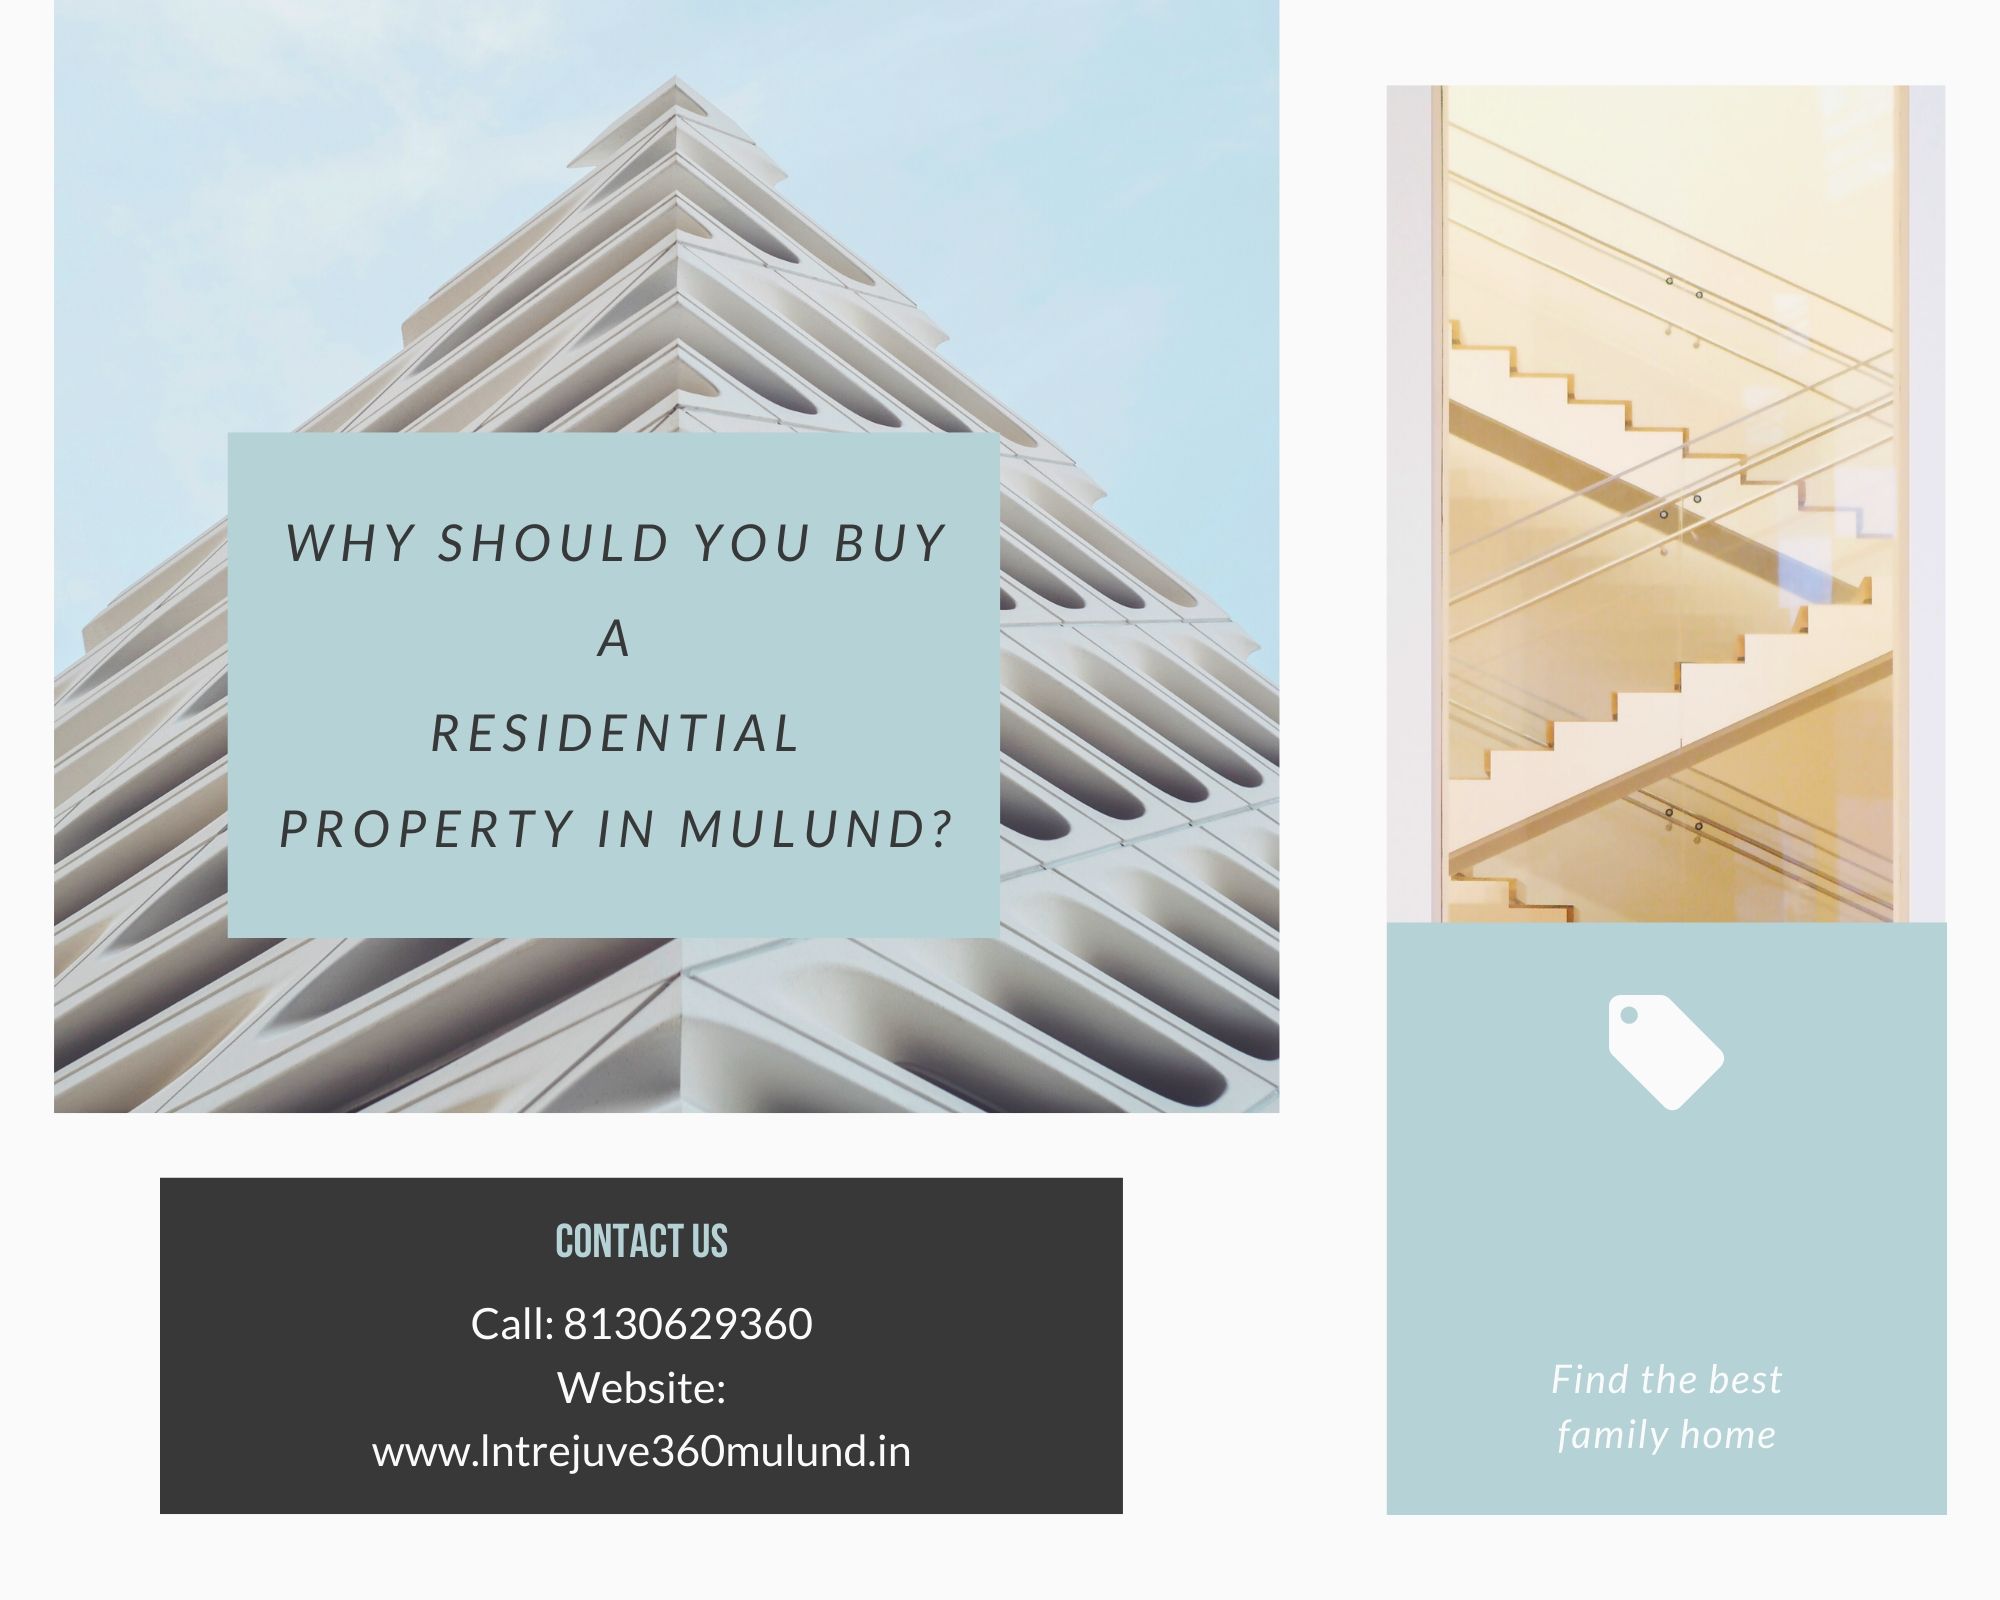 Why should you buy a residential property in Mulund?